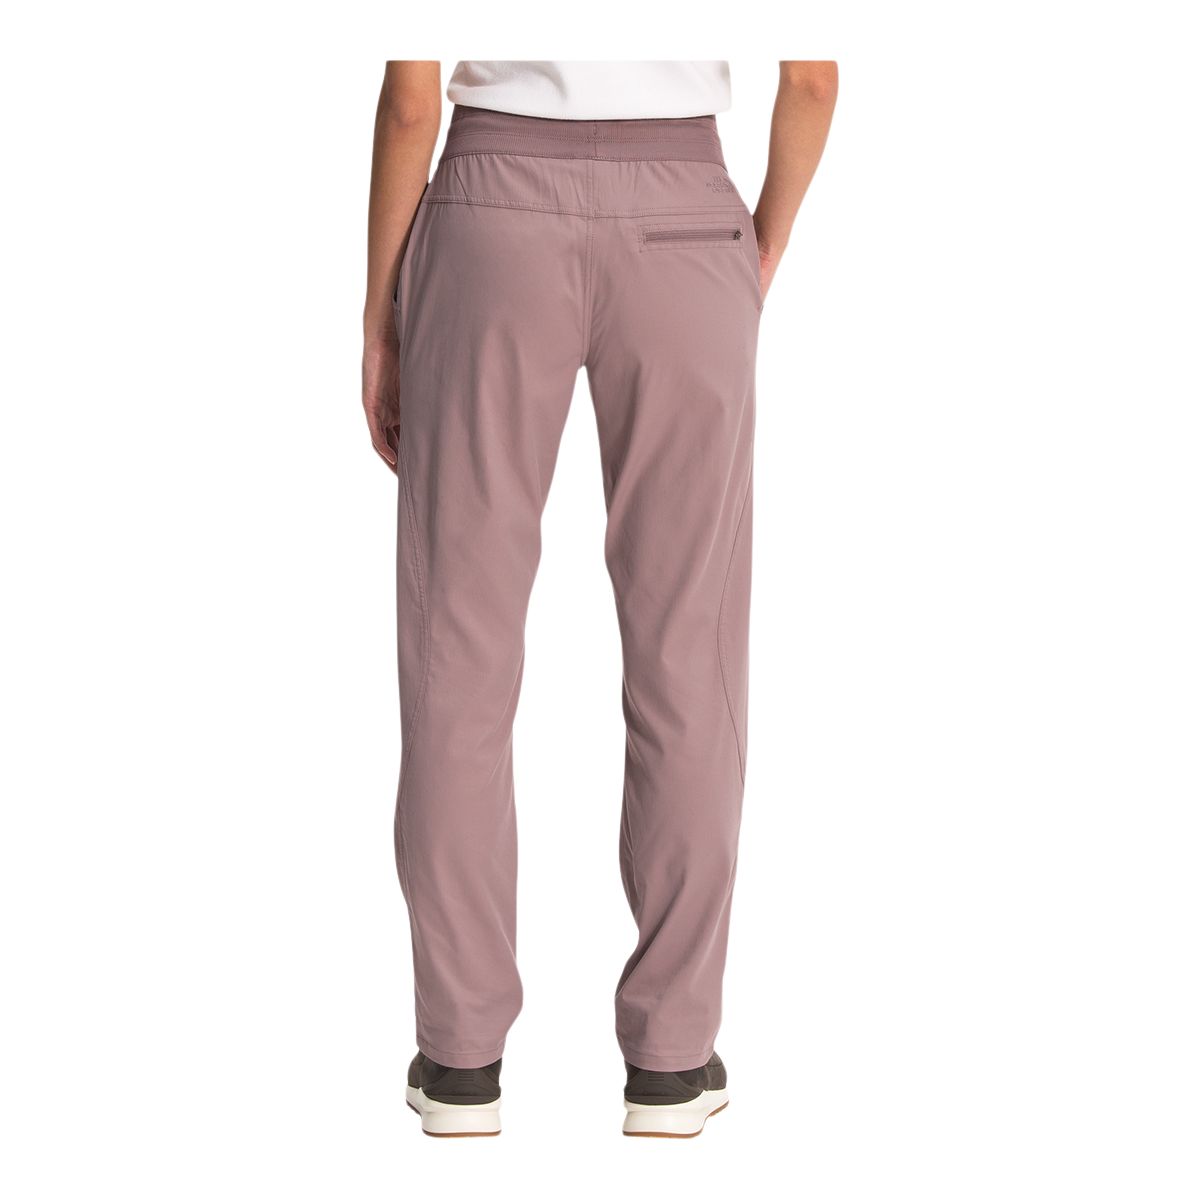 https://media-www.atmosphere.ca/product/div-03-softgoods/dpt-72-casual-clothing/sdpt-02-womens/333518989/tnf-w-aphrodite-motion-pant-f-twilight-mauve-xs--18fa1fe4-1ade-49ef-b506-af57a6dc11ea-jpgrendition.jpg?imdensity=1&imwidth=1244&impolicy=mZoom